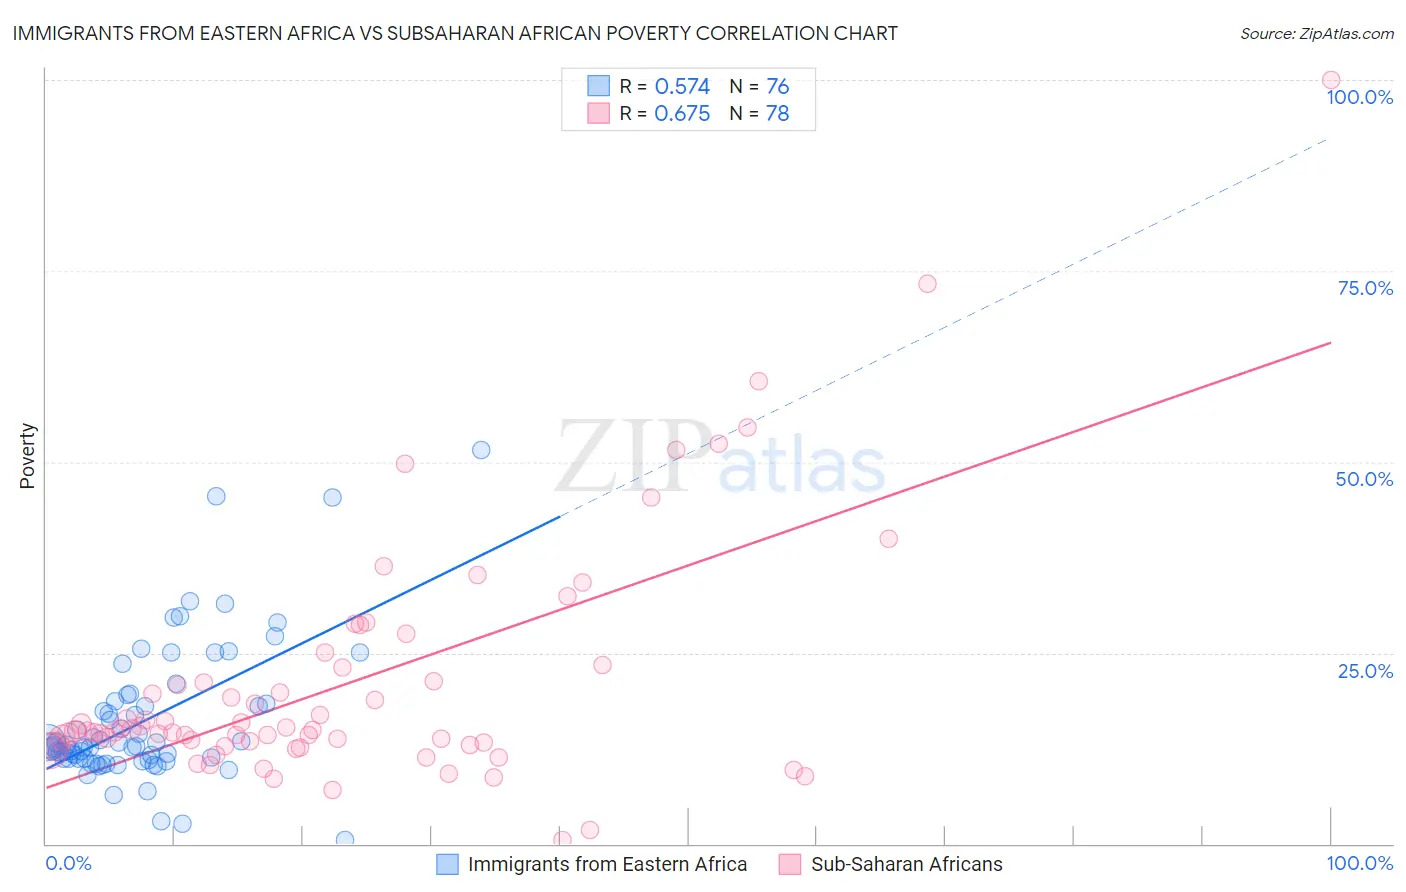 Immigrants from Eastern Africa vs Subsaharan African Poverty